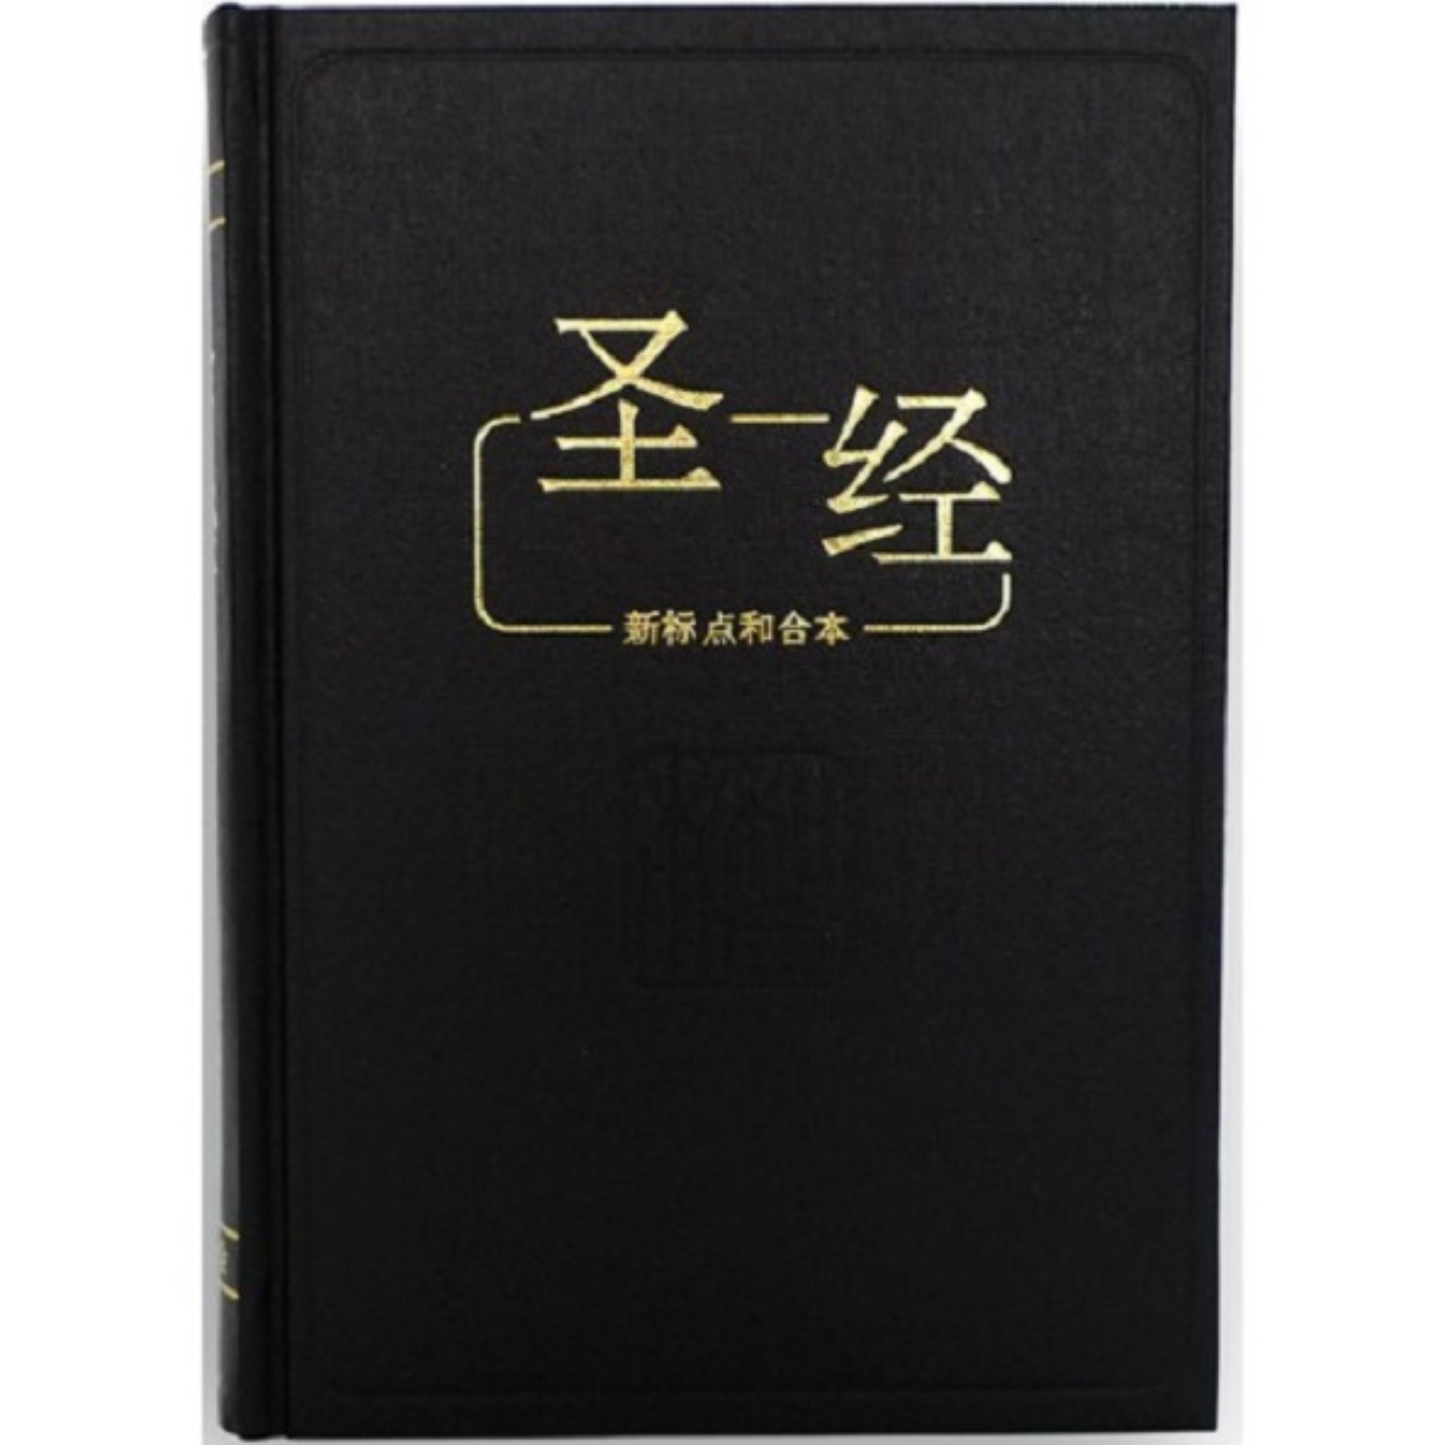 Chinese Bible - Simplified Reference (CUNPSS063) - Black, Hardcover